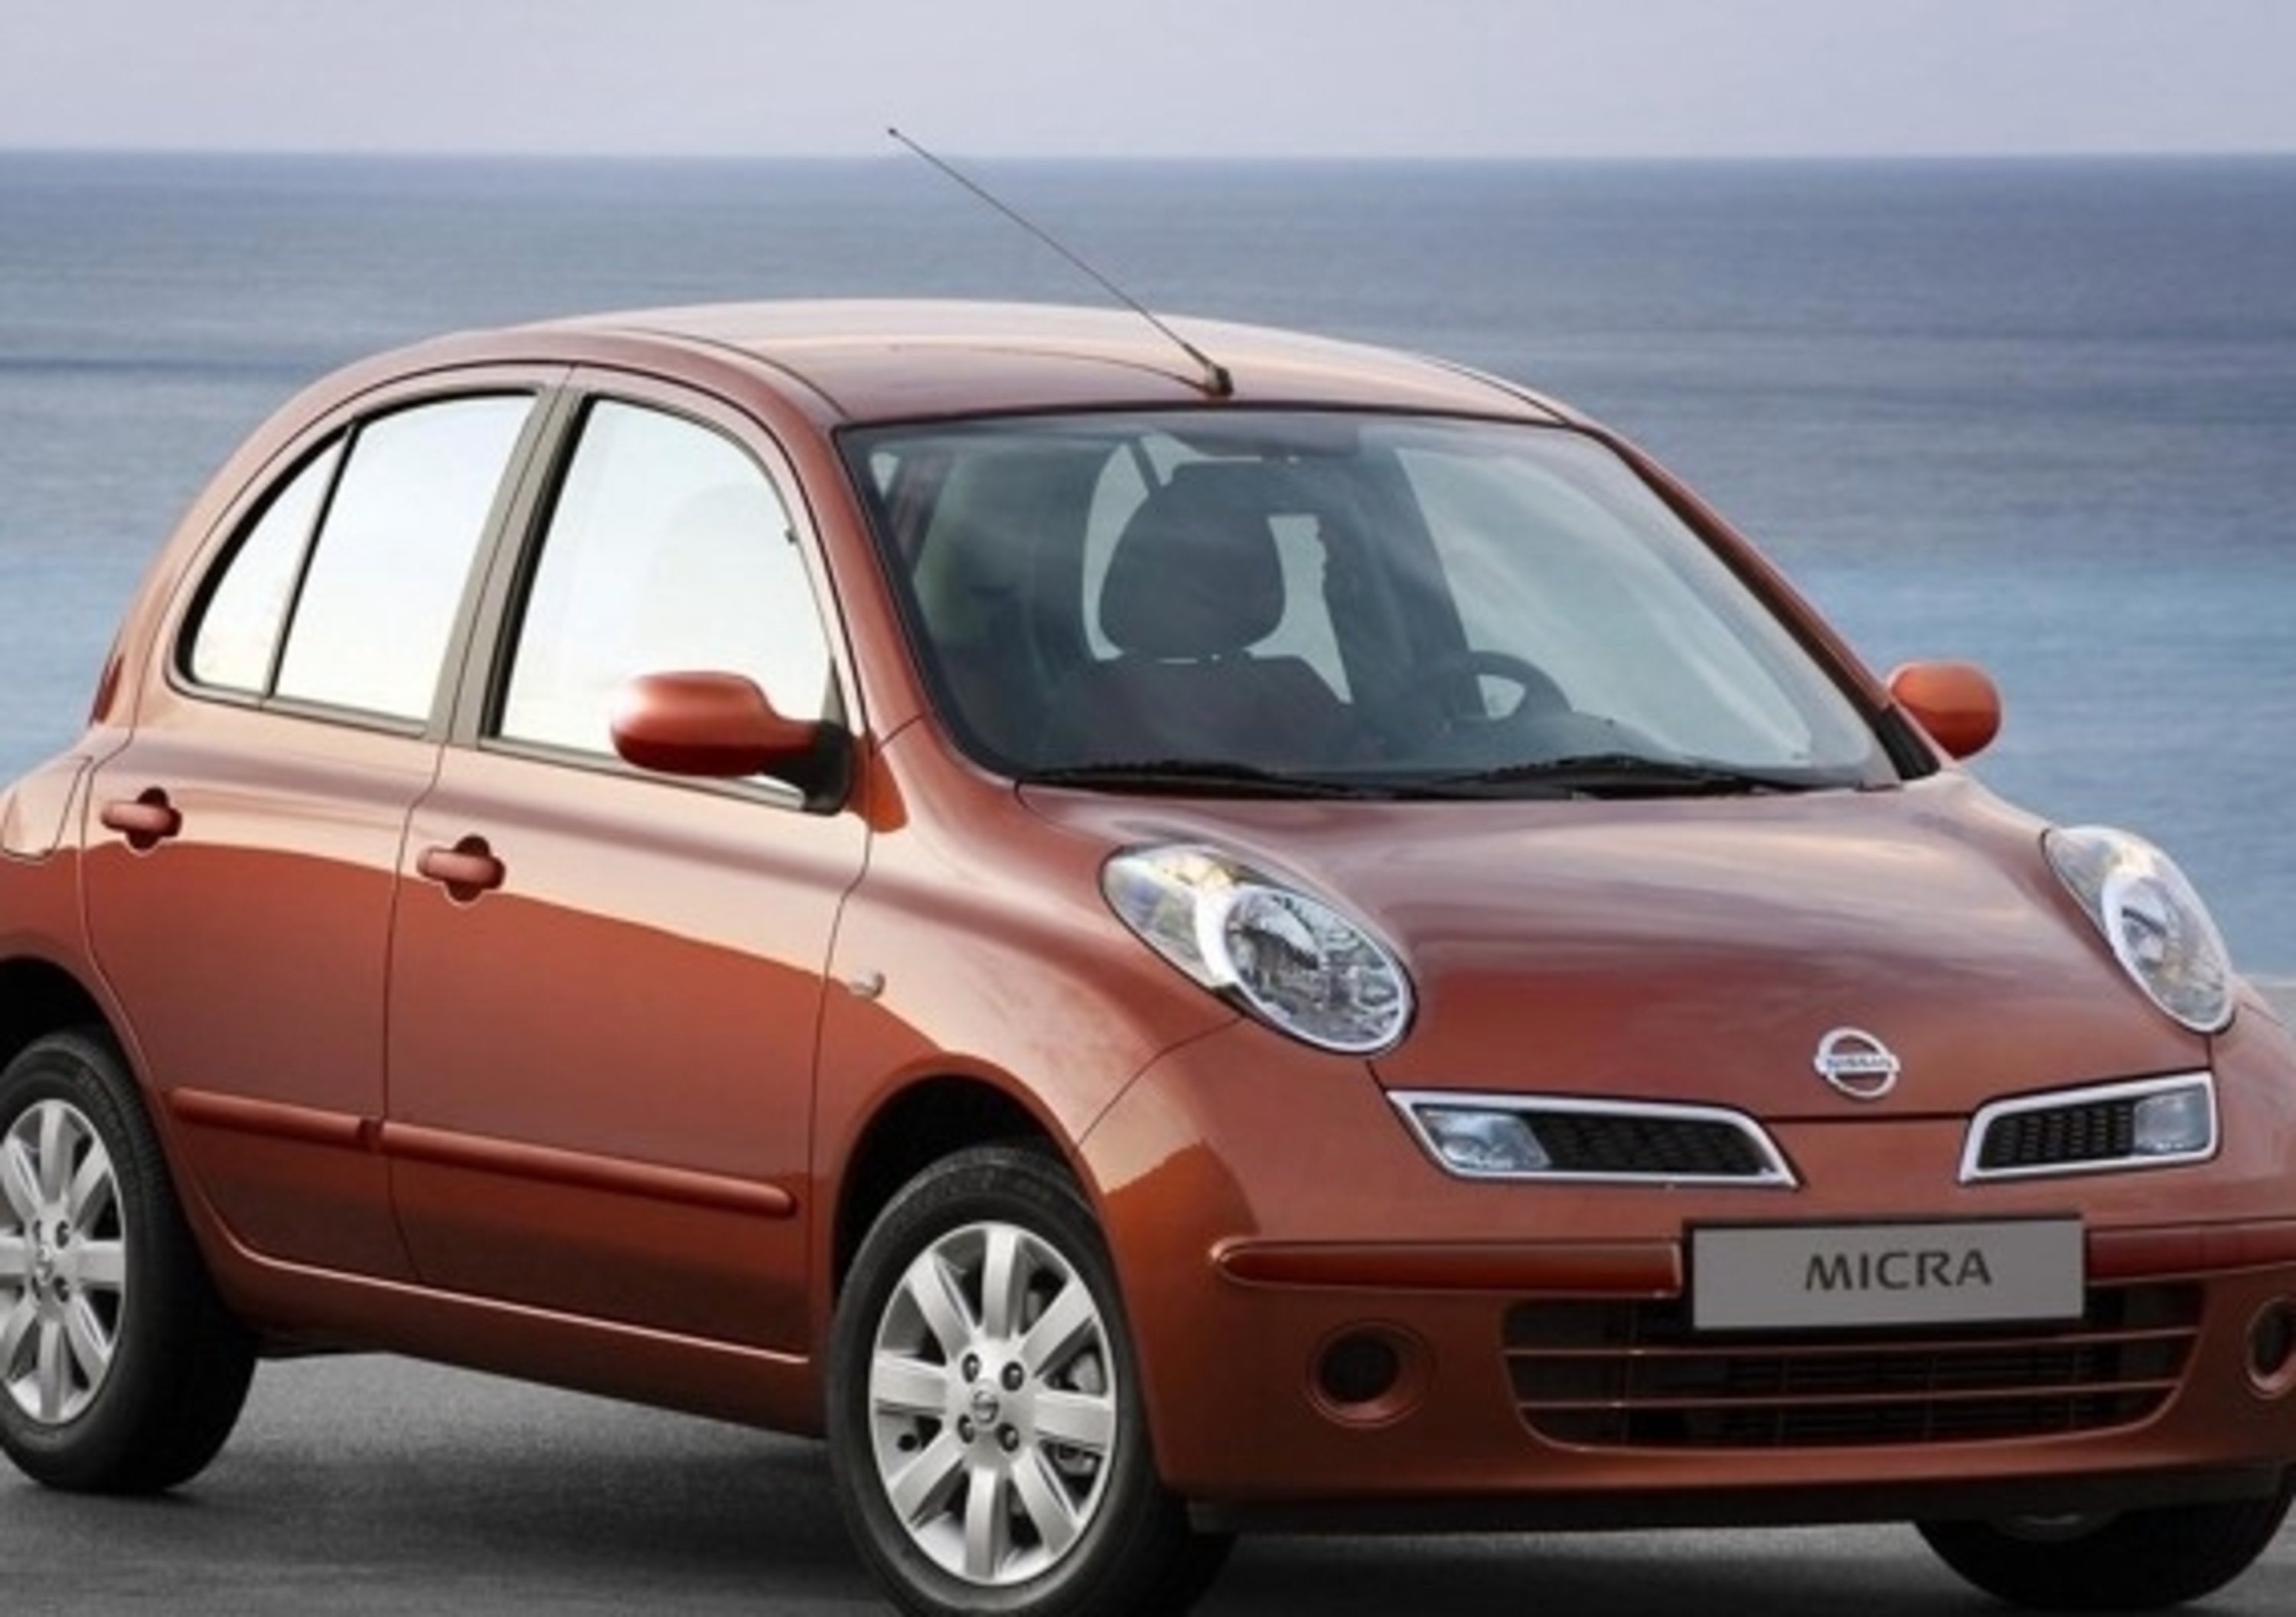 Nissan Micra restyling